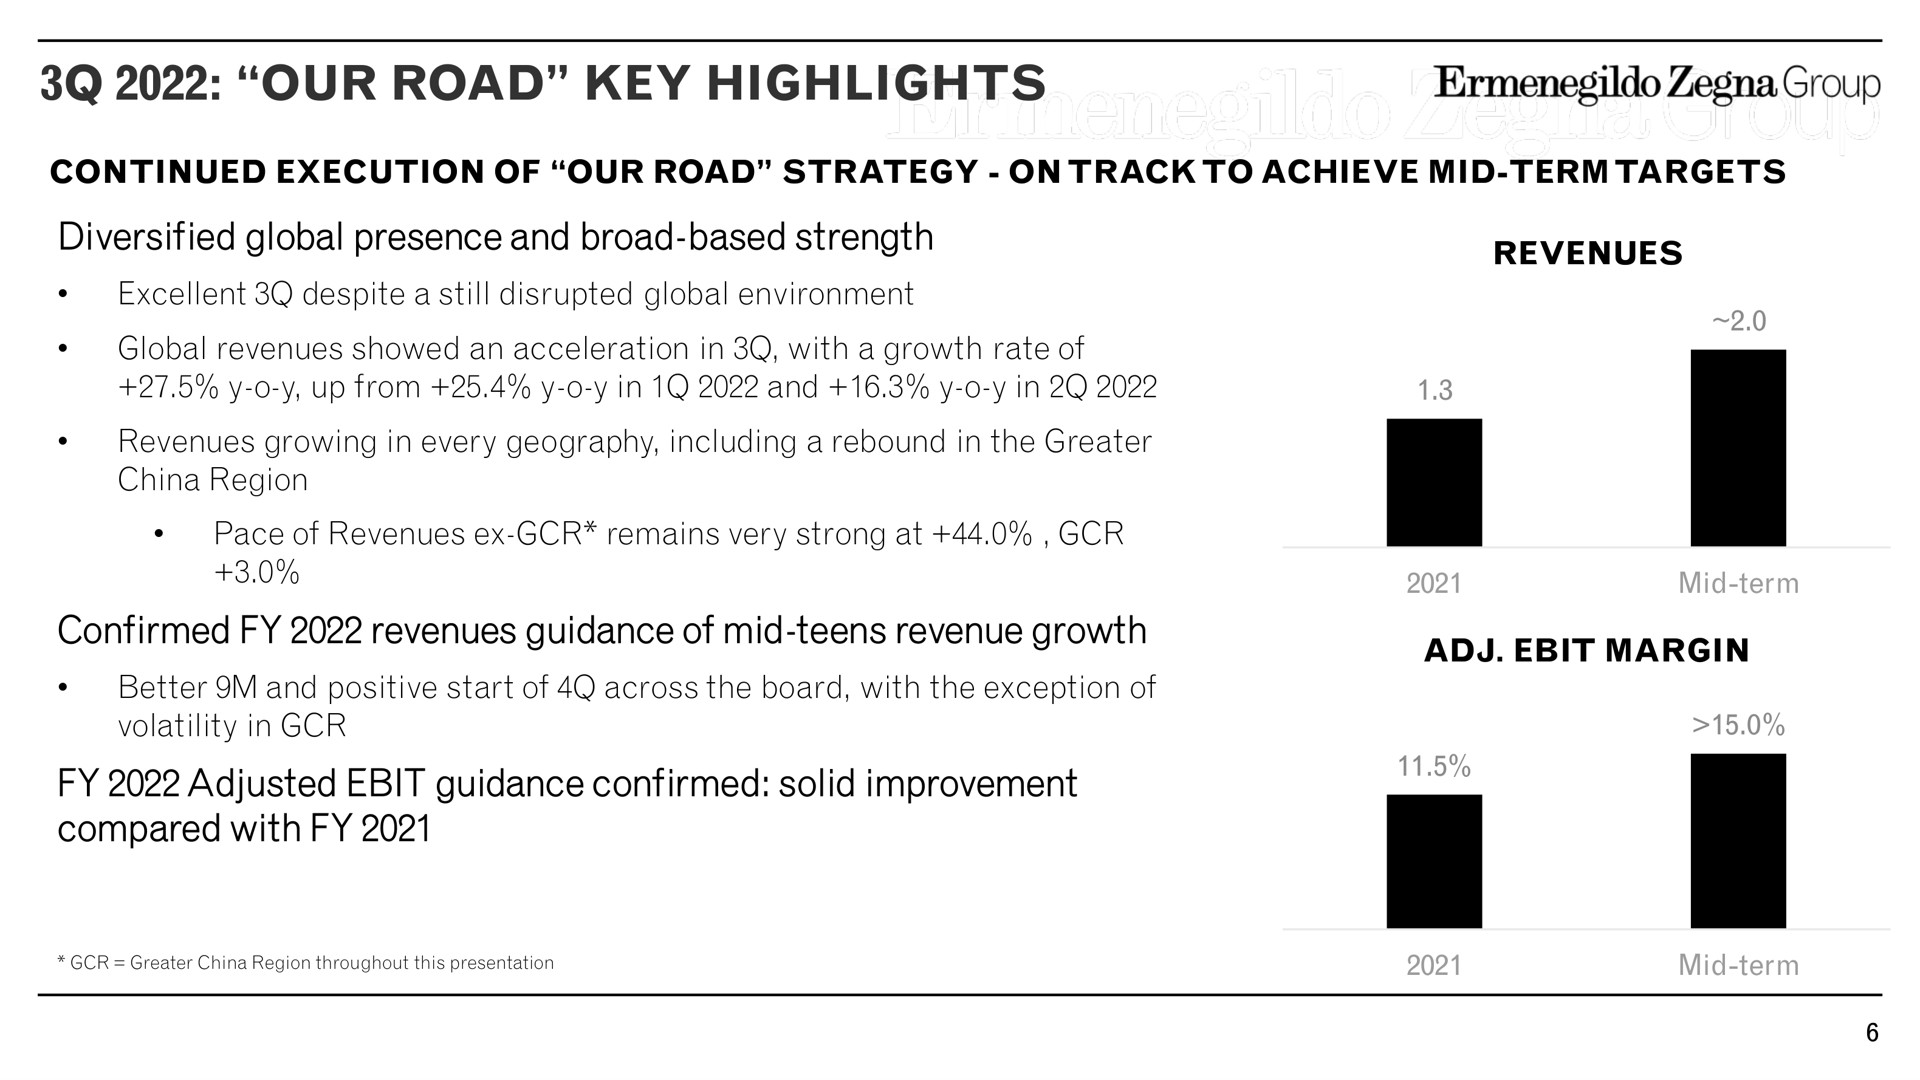 our road key highlights diversified global presence and broad based strength confirmed revenues guidance of mid teens revenue growth adjusted guidance confirmed solid improvement compared with group | Zegna